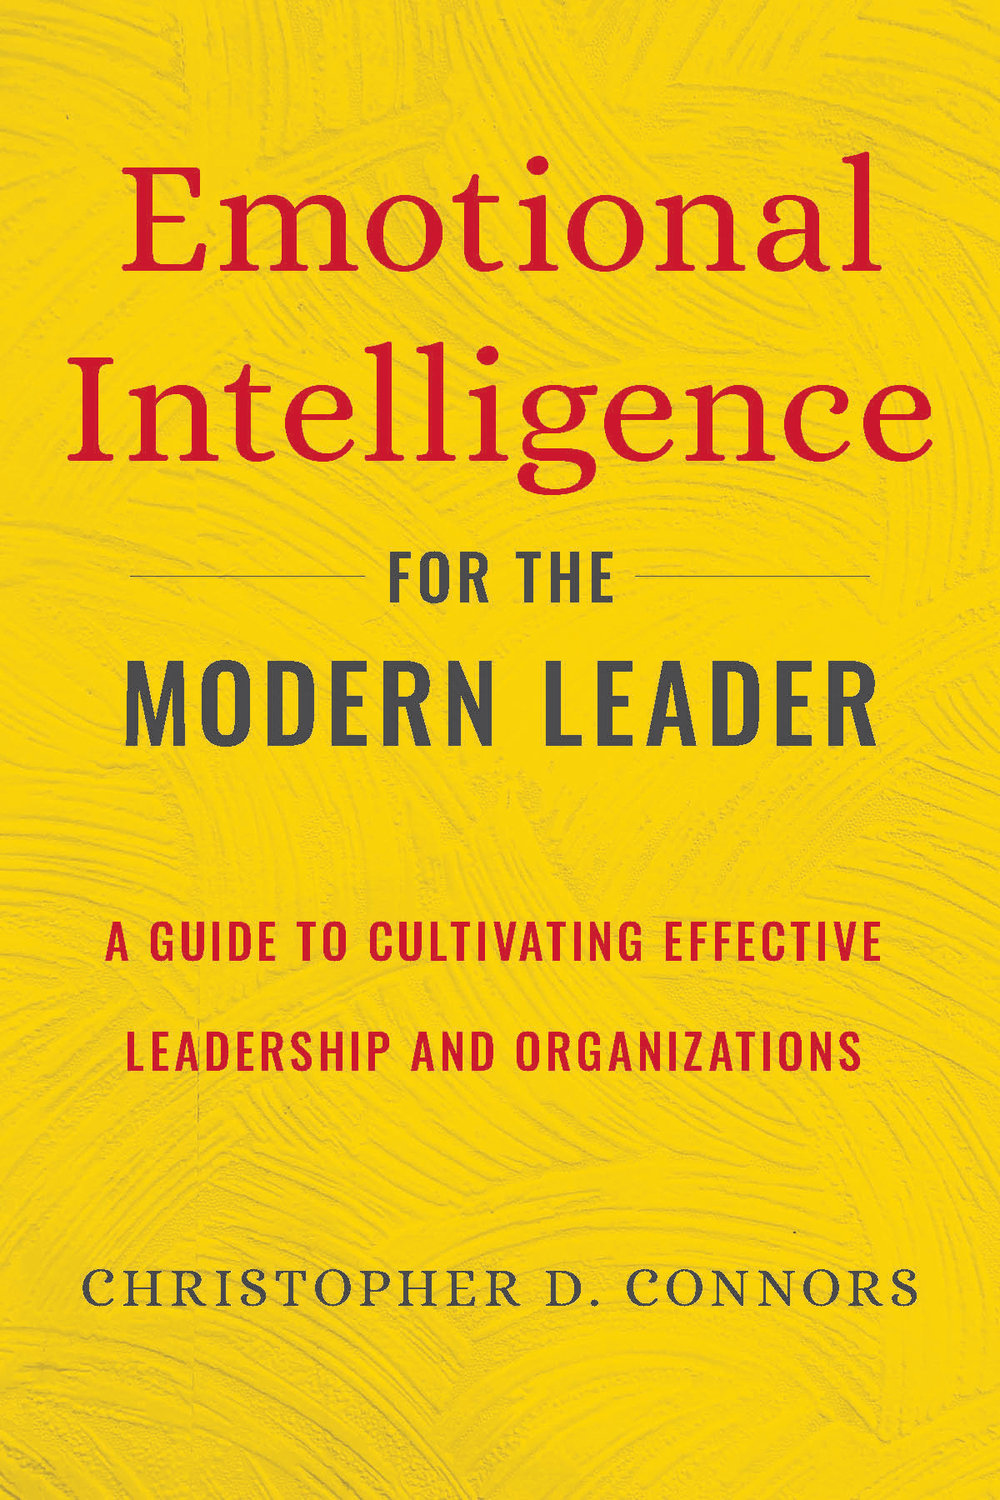 Connors’ new book, “Emotional Intelligence for the Modern Leader,” is a short guide for both young and experienced leaders and executives “on what emotional intelligence is and how to use it for career and life success.”